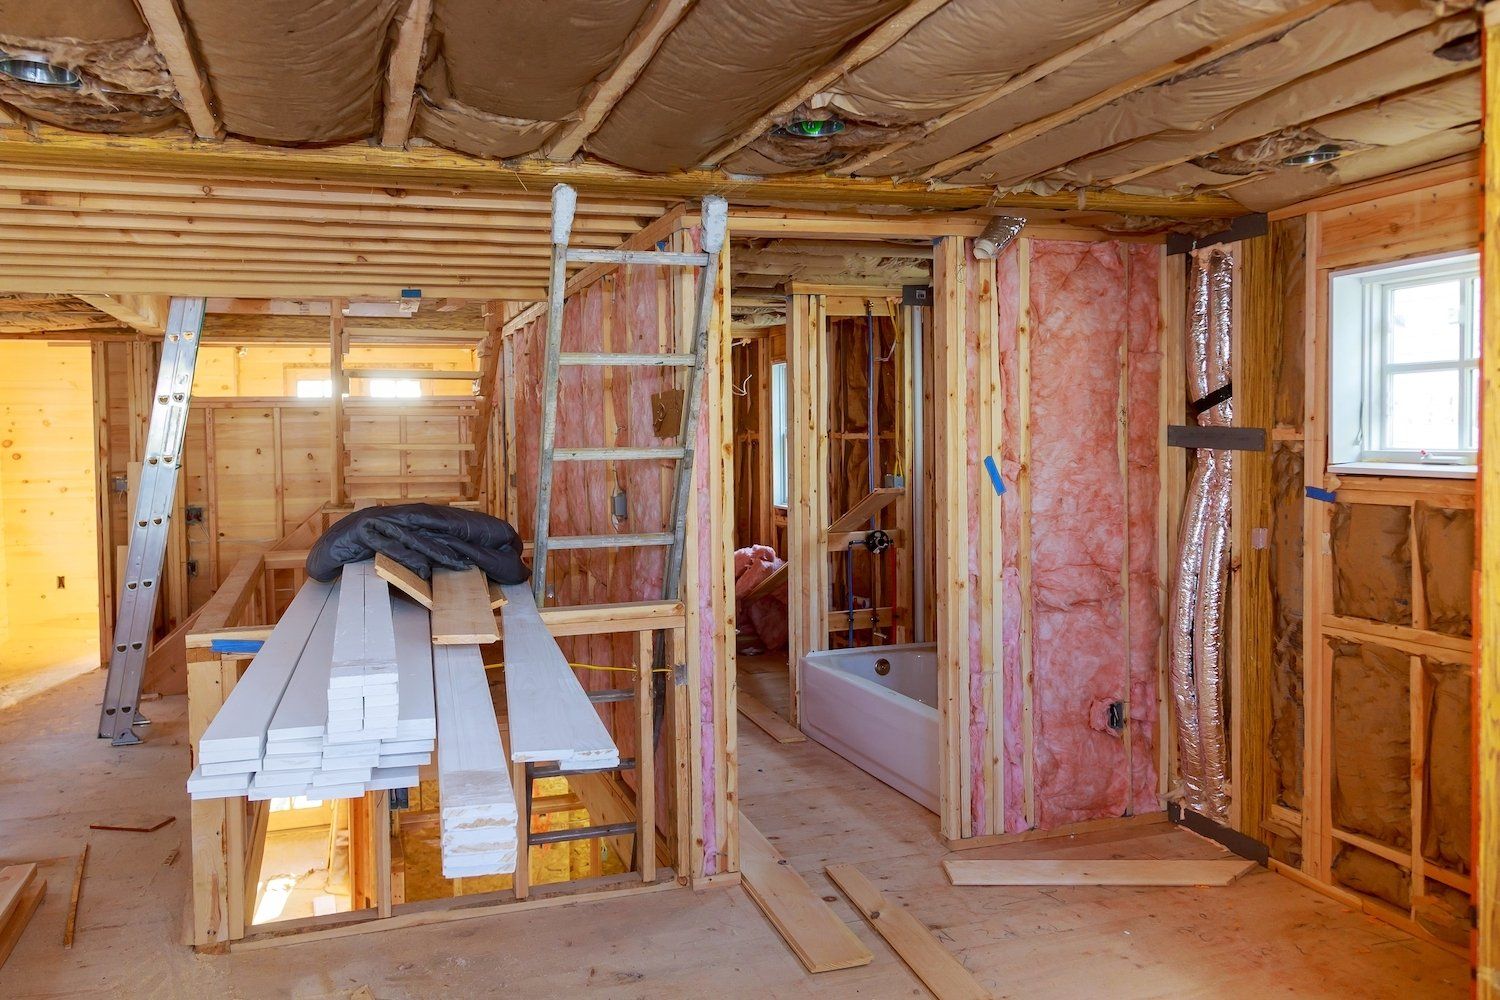 Fiberglass Insulation From DK Spray & Foam in Mid-MO Has That Recognizable, Pink Composition.